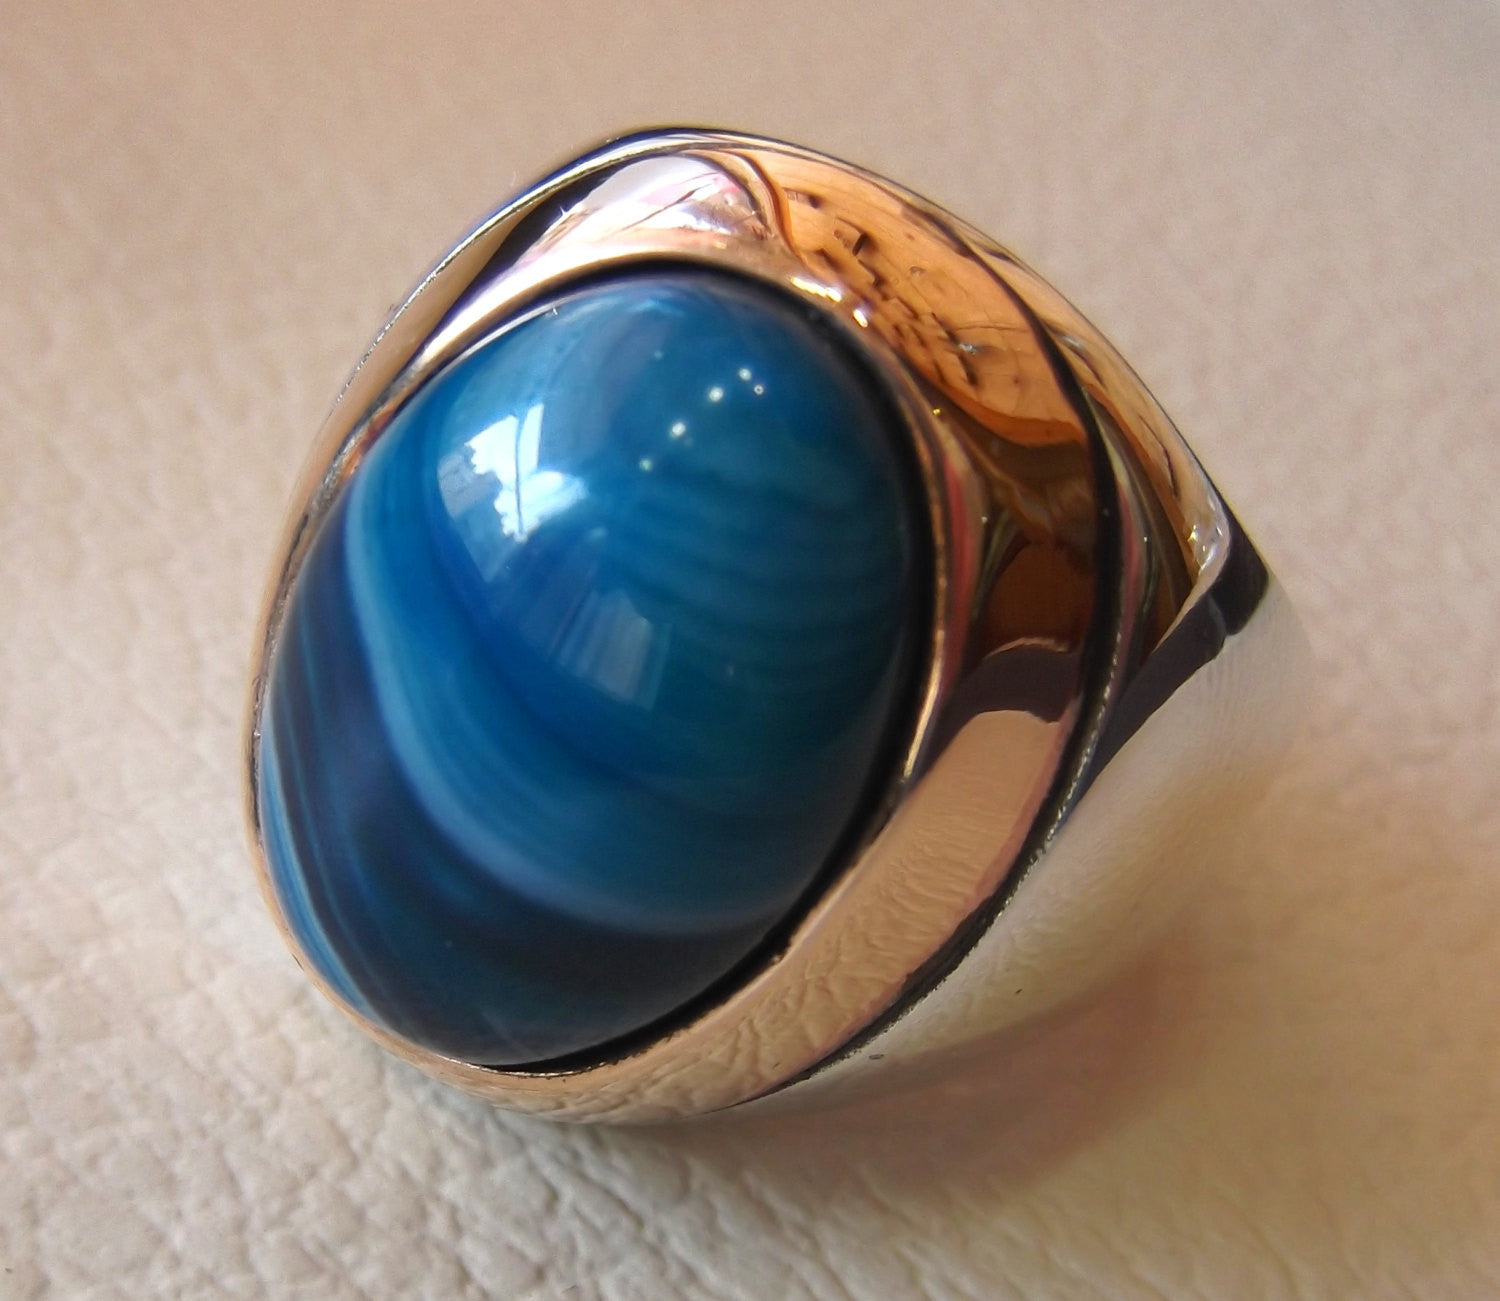 blue agate striped oval cabochon huge man ring sterling silver 925 bronze frame all sizes two tone jewelry arabic middle eastern style